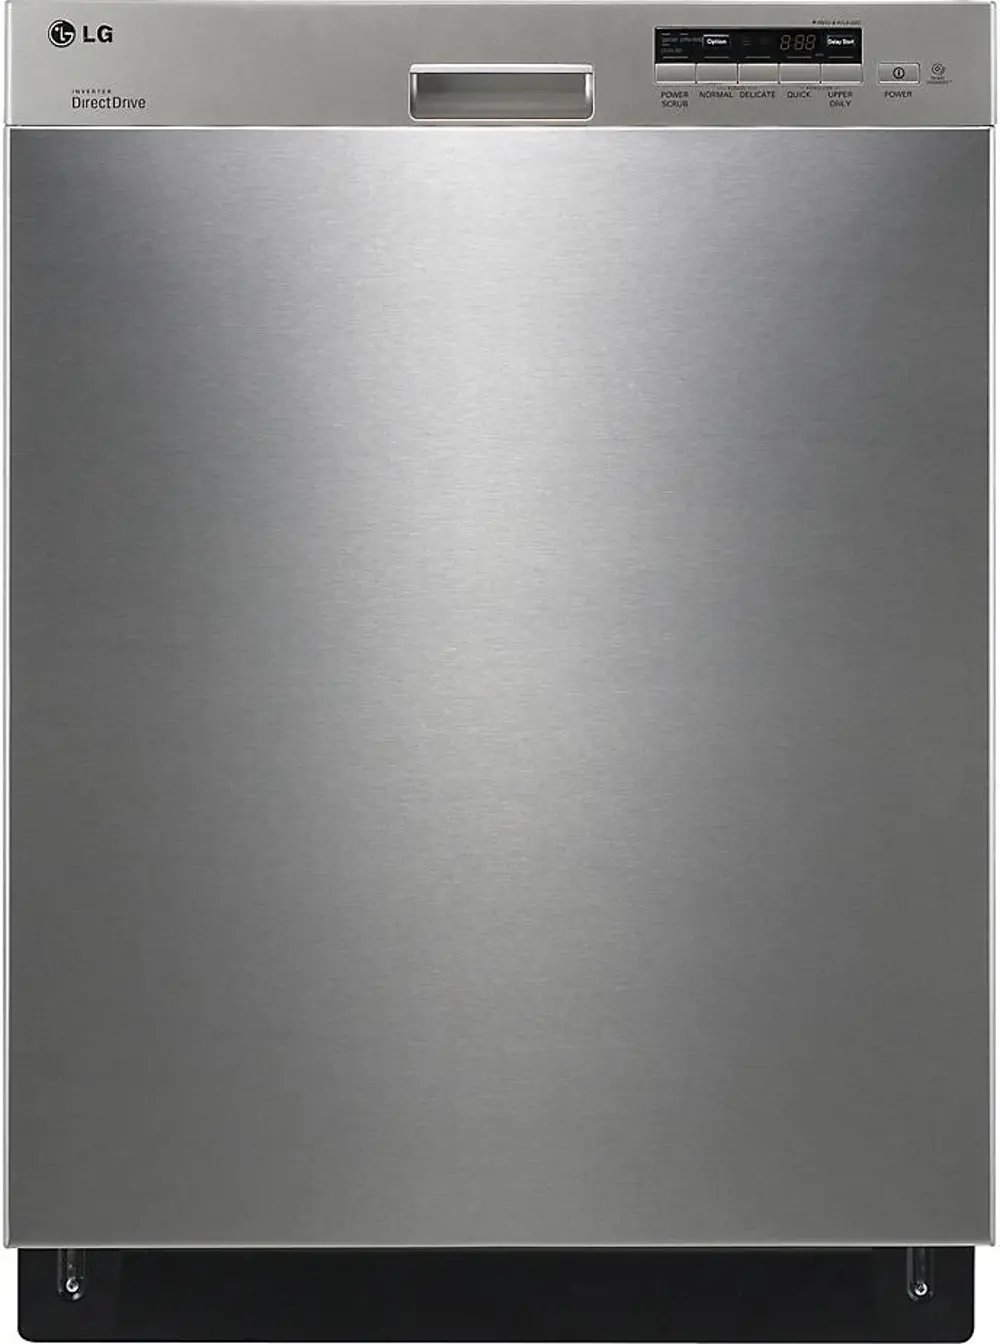 LDS5040ST LG 24 Inch Semi-Integrated Dishwasher with Flexible EasyRack System -1